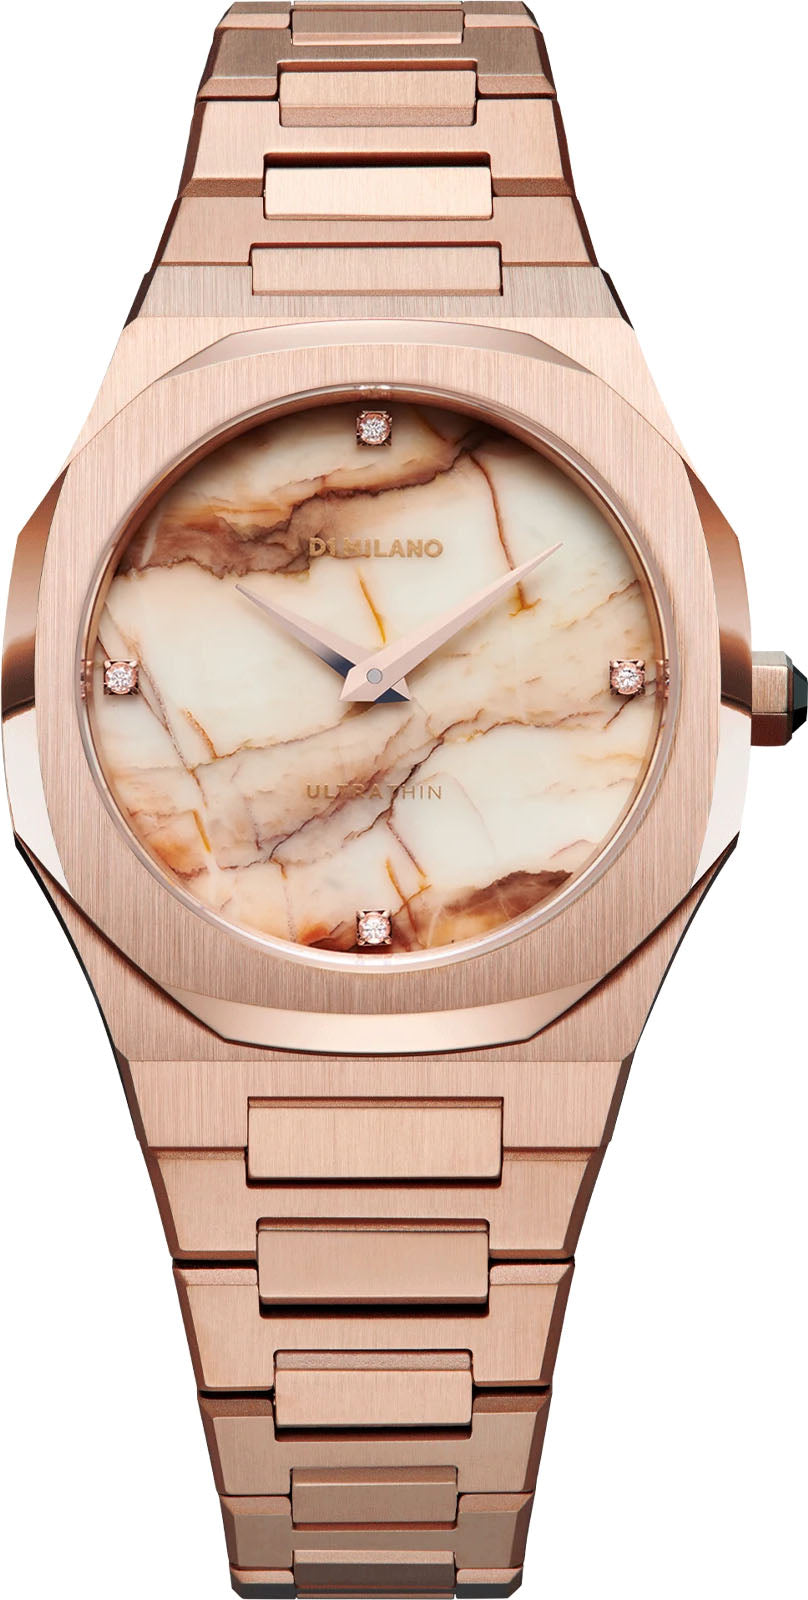 Photos - Wrist Watch Milano D1  Watch Ultra Thin Marble Rose - Pink DLM-114 